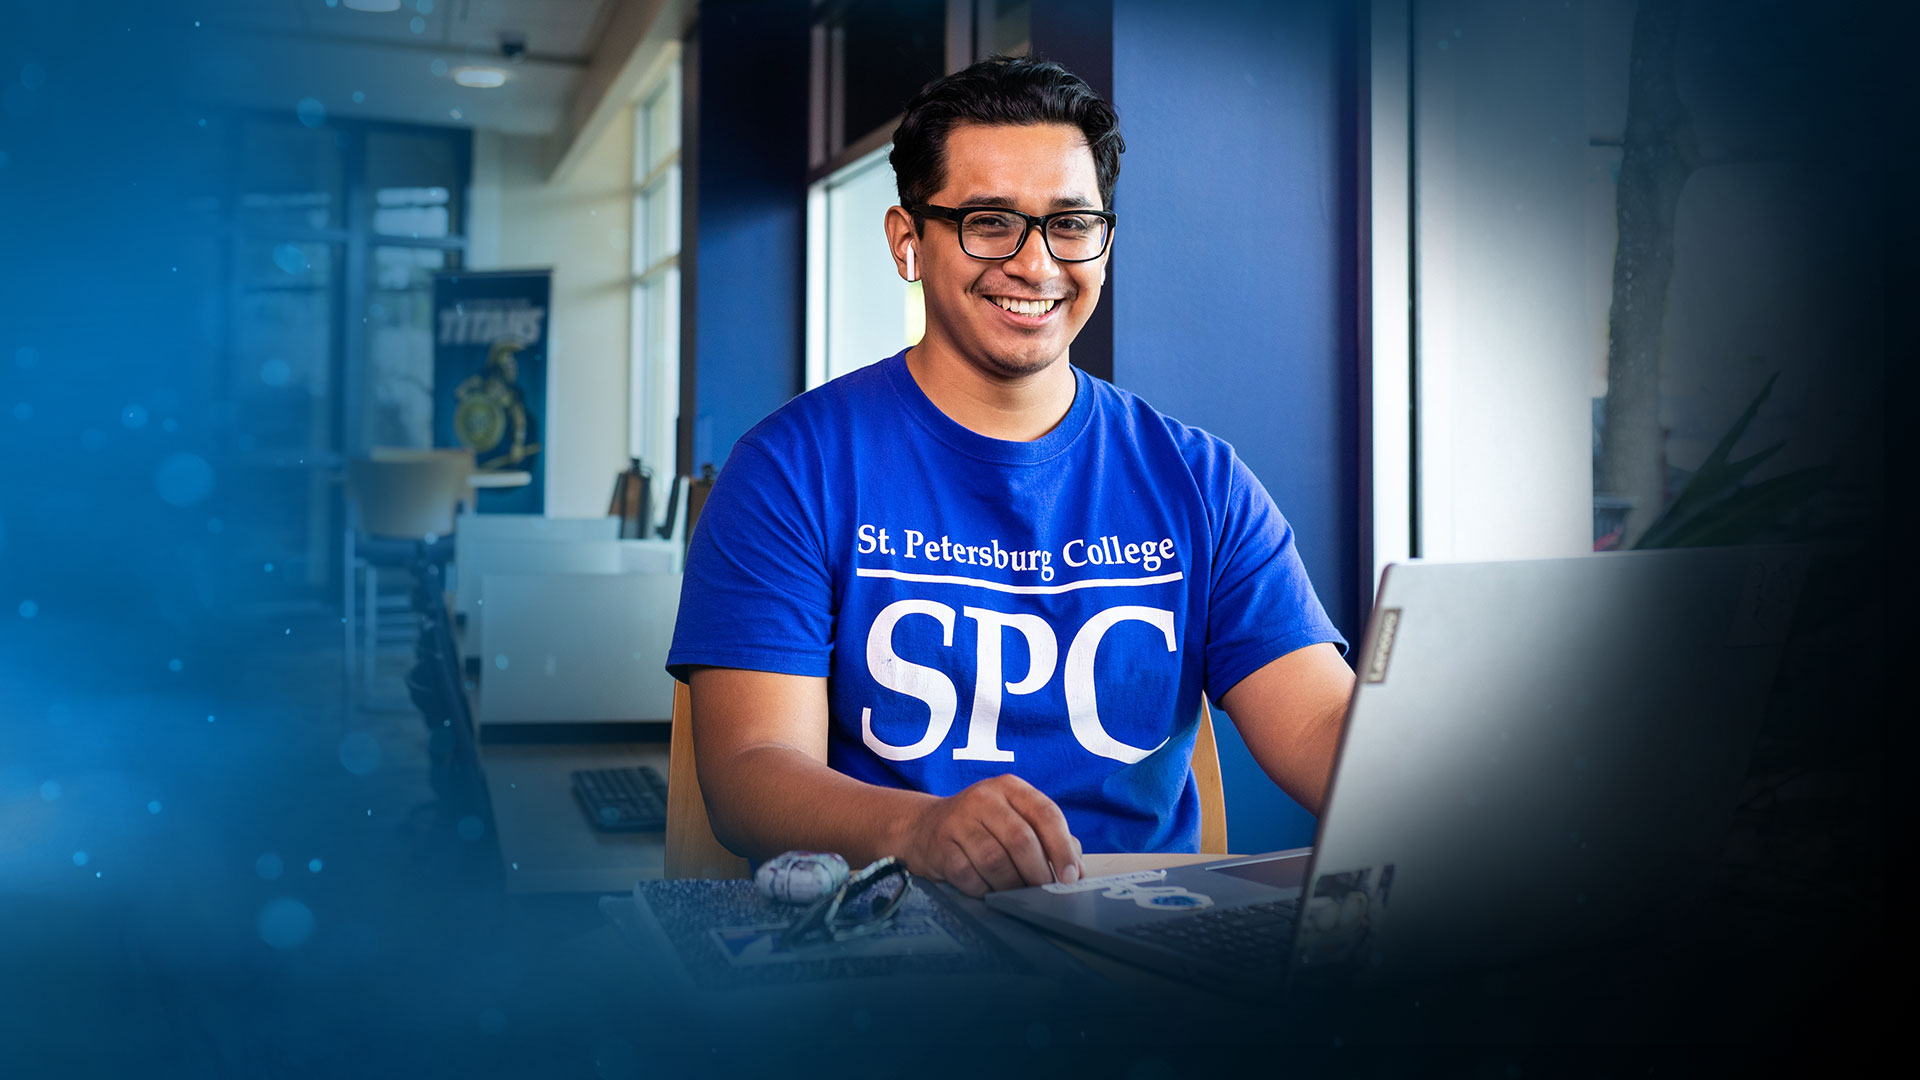 spc student sitting at a laptop computer smiling